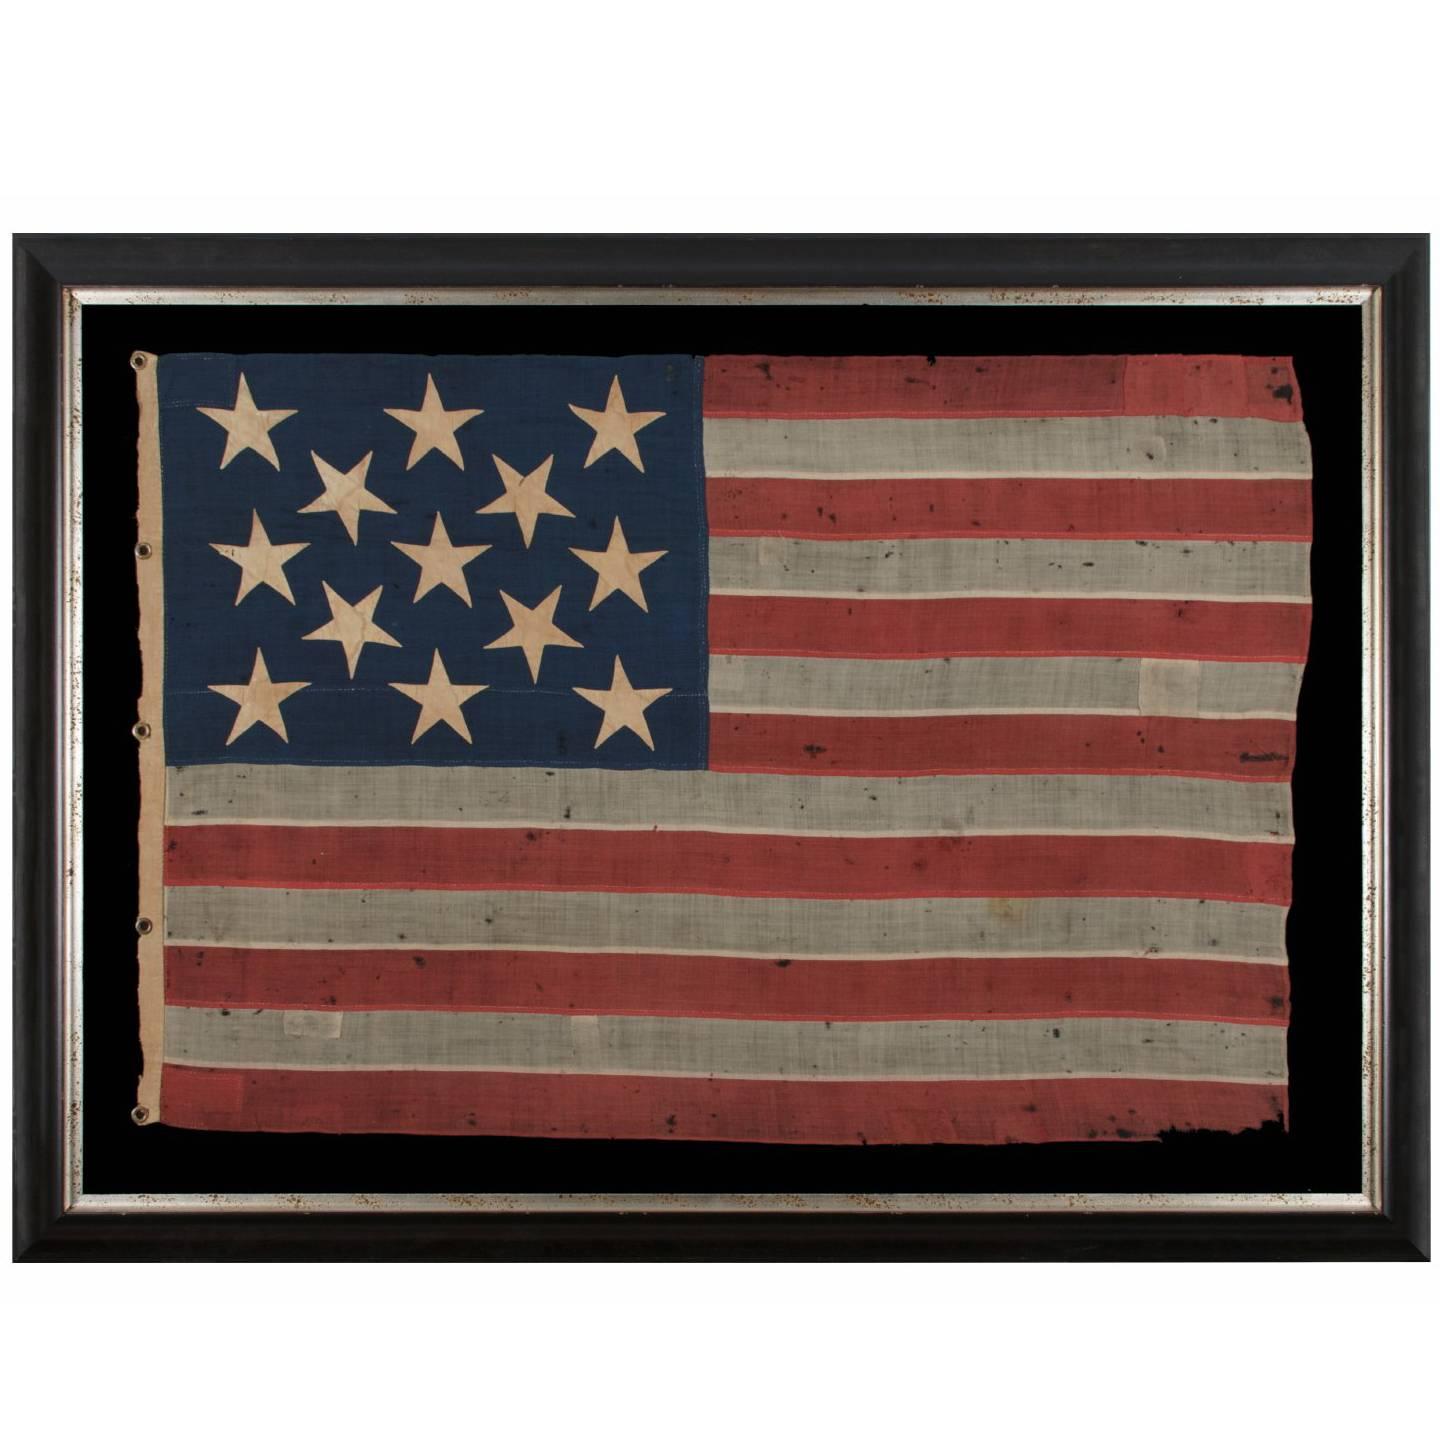 13 Large and Strikingly Visual Stars on a U.S Navy Small Boat Ensign Flag